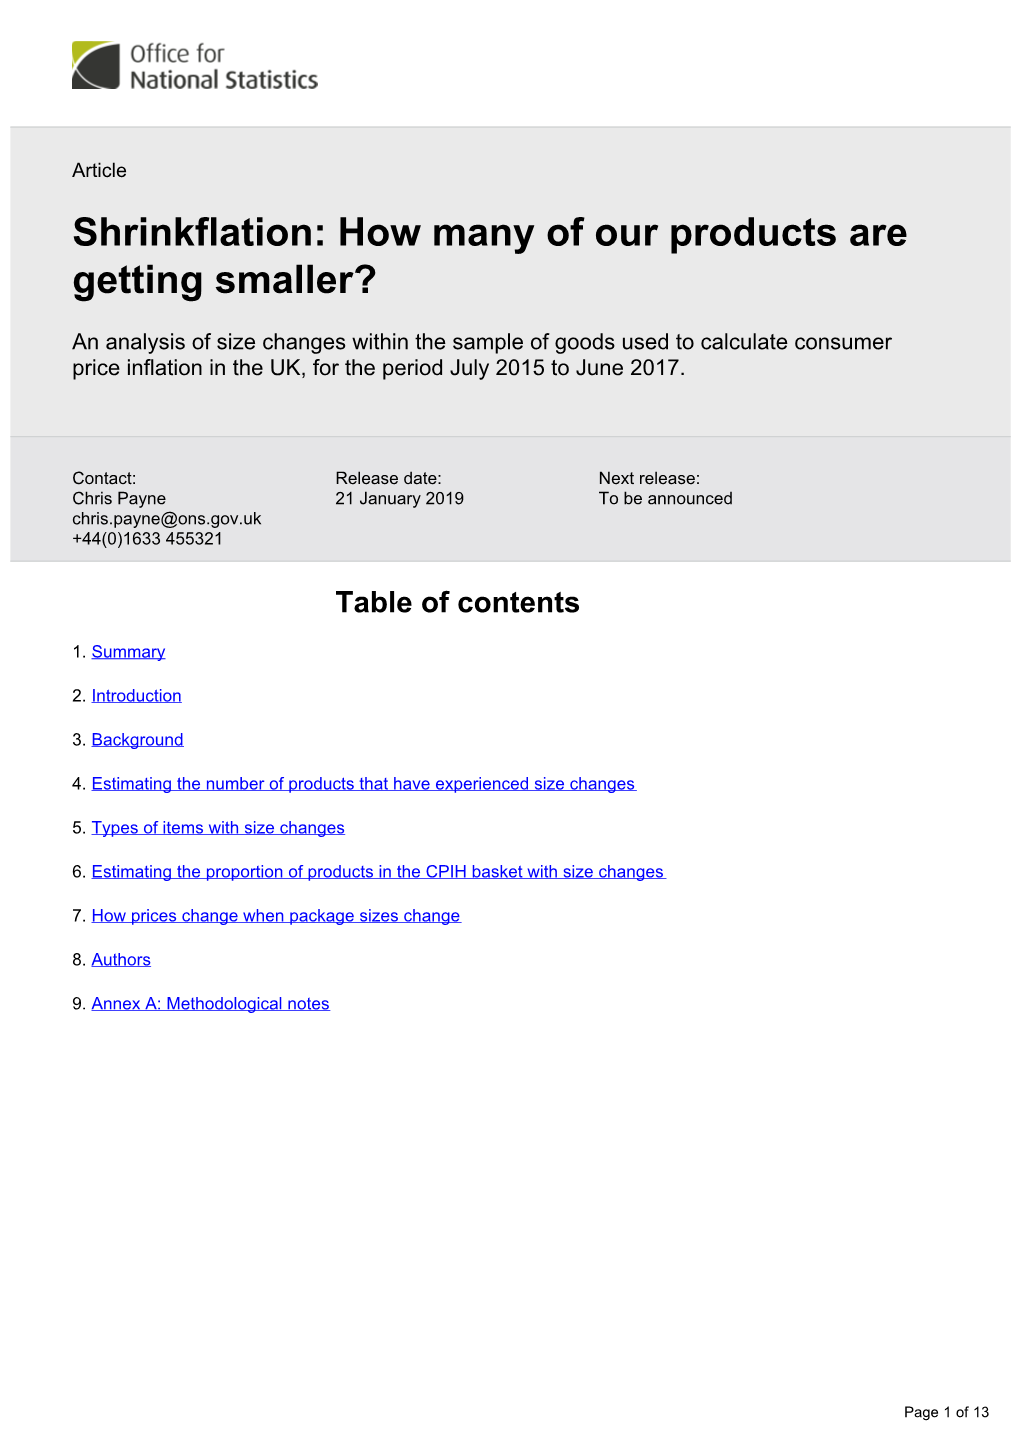 Shrinkflation: How Many of Our Products Are Getting Smaller?